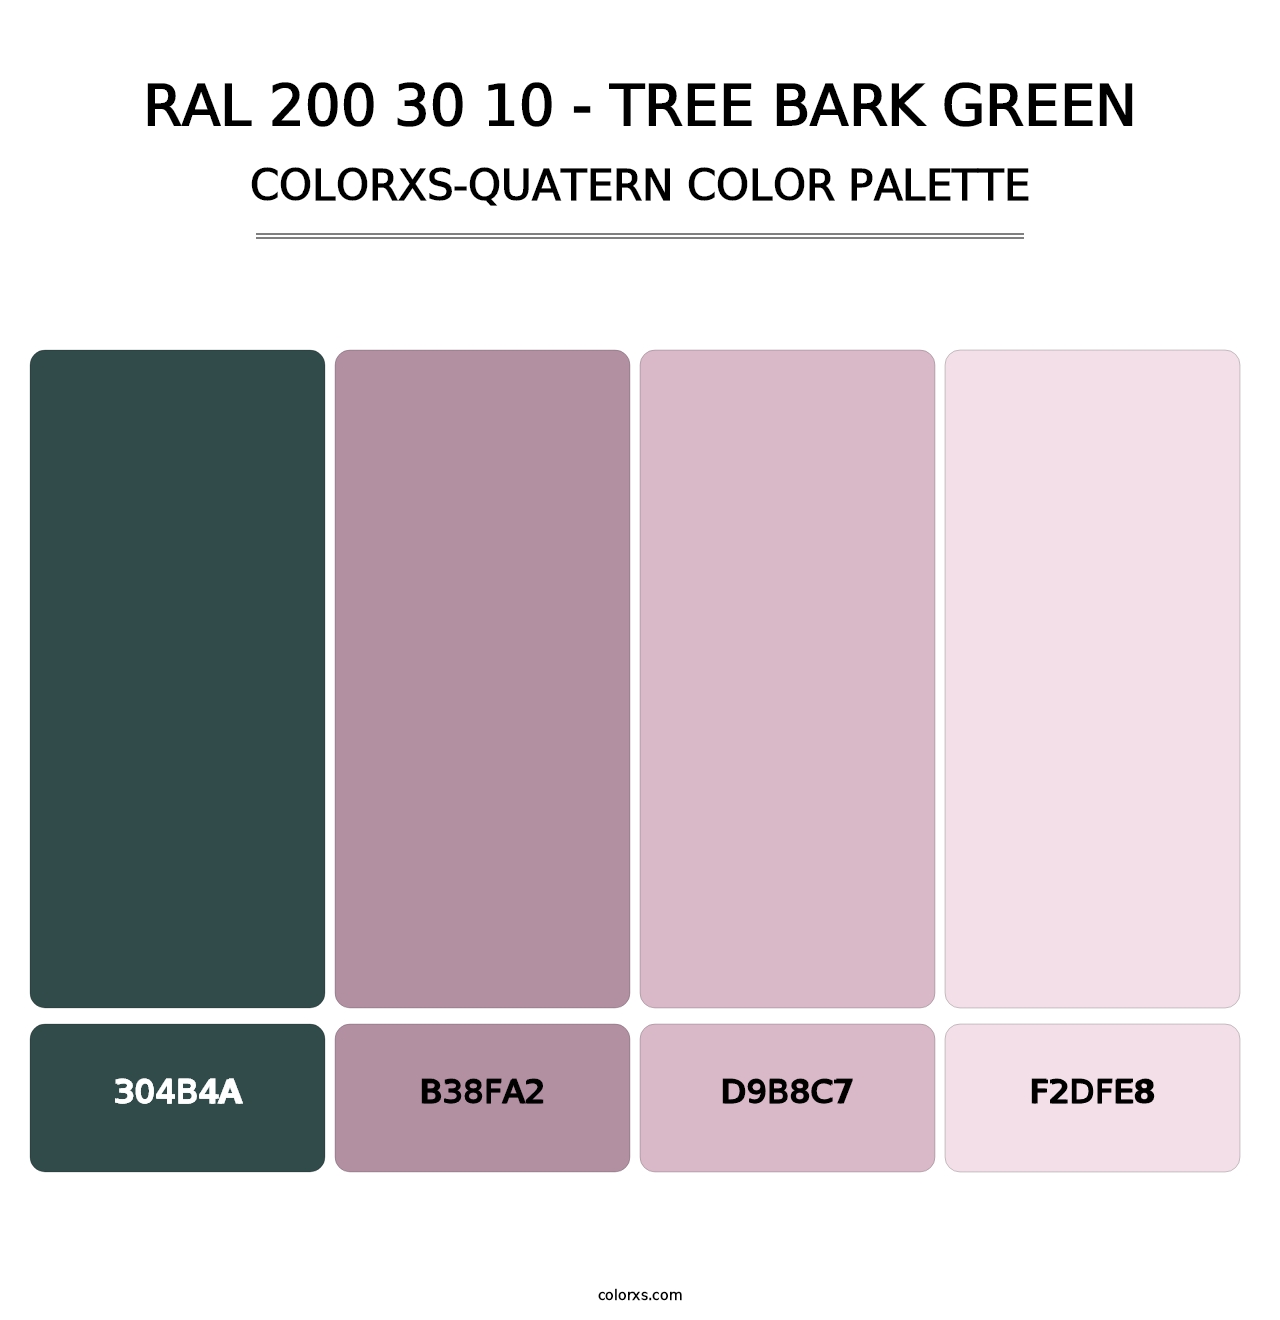 RAL 200 30 10 - Tree Bark Green - Colorxs Quatern Palette